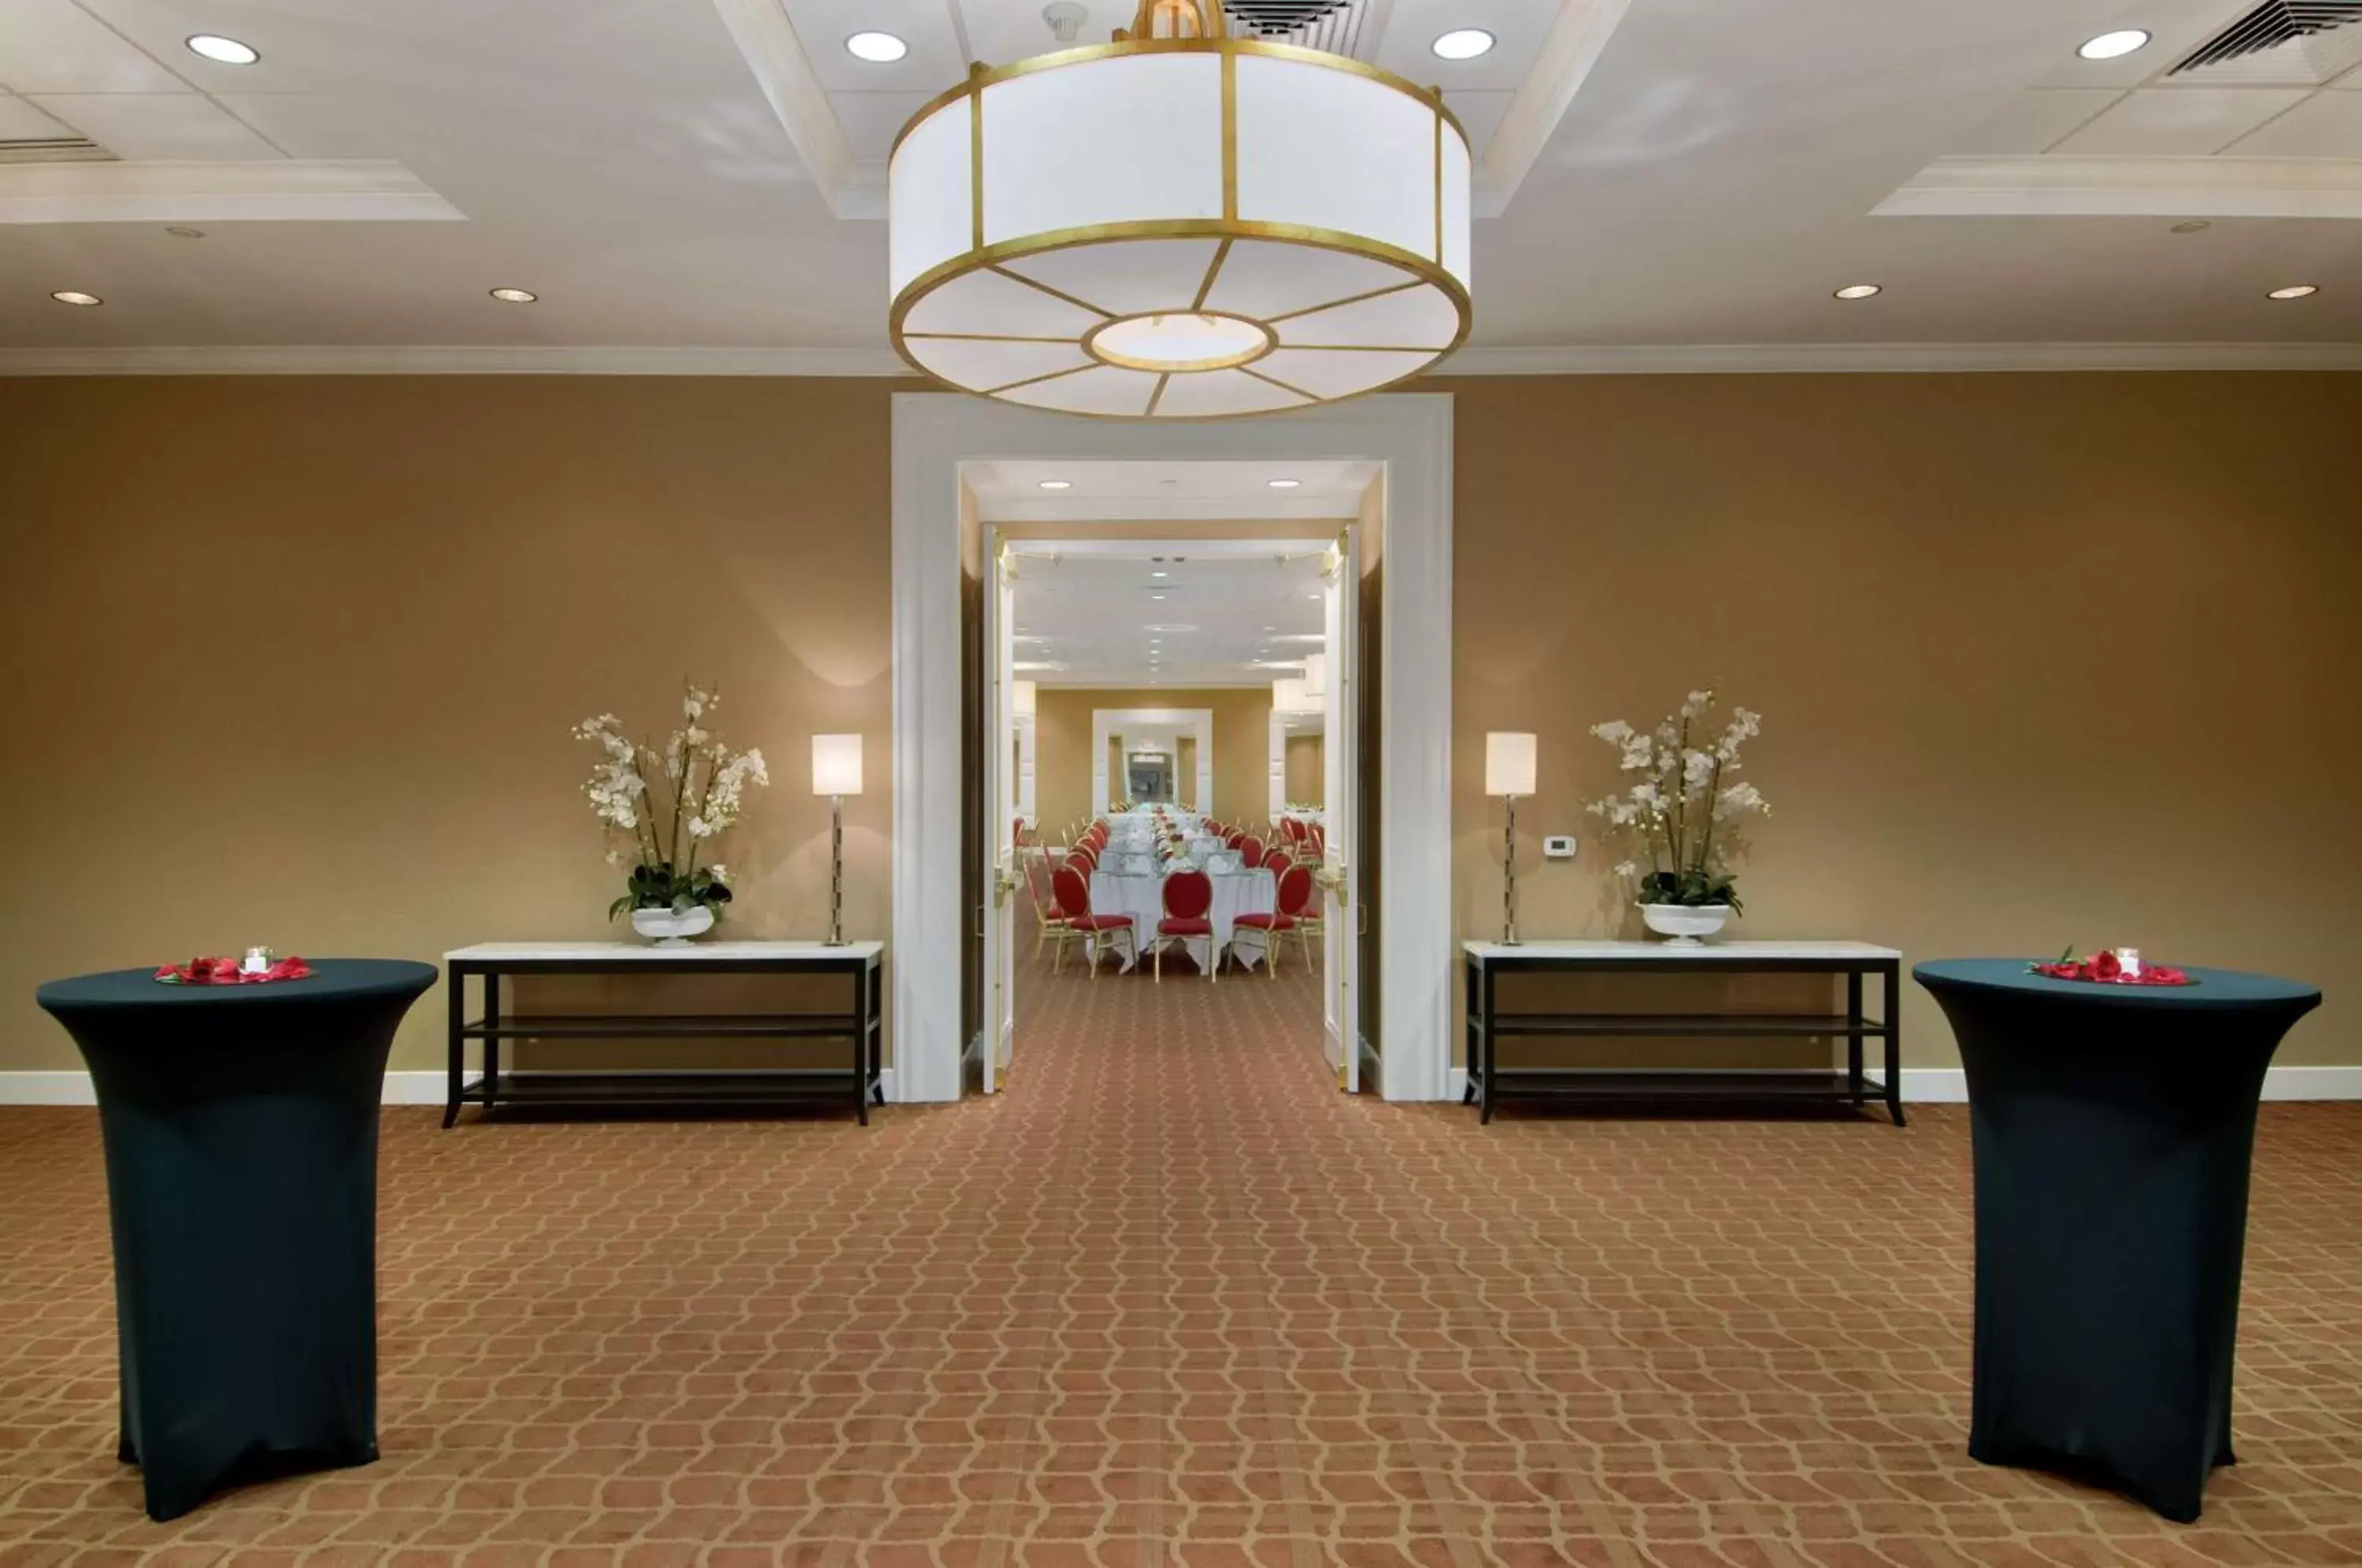 Meeting/conference room, Banquet Facilities in Hilton St. Louis Airport